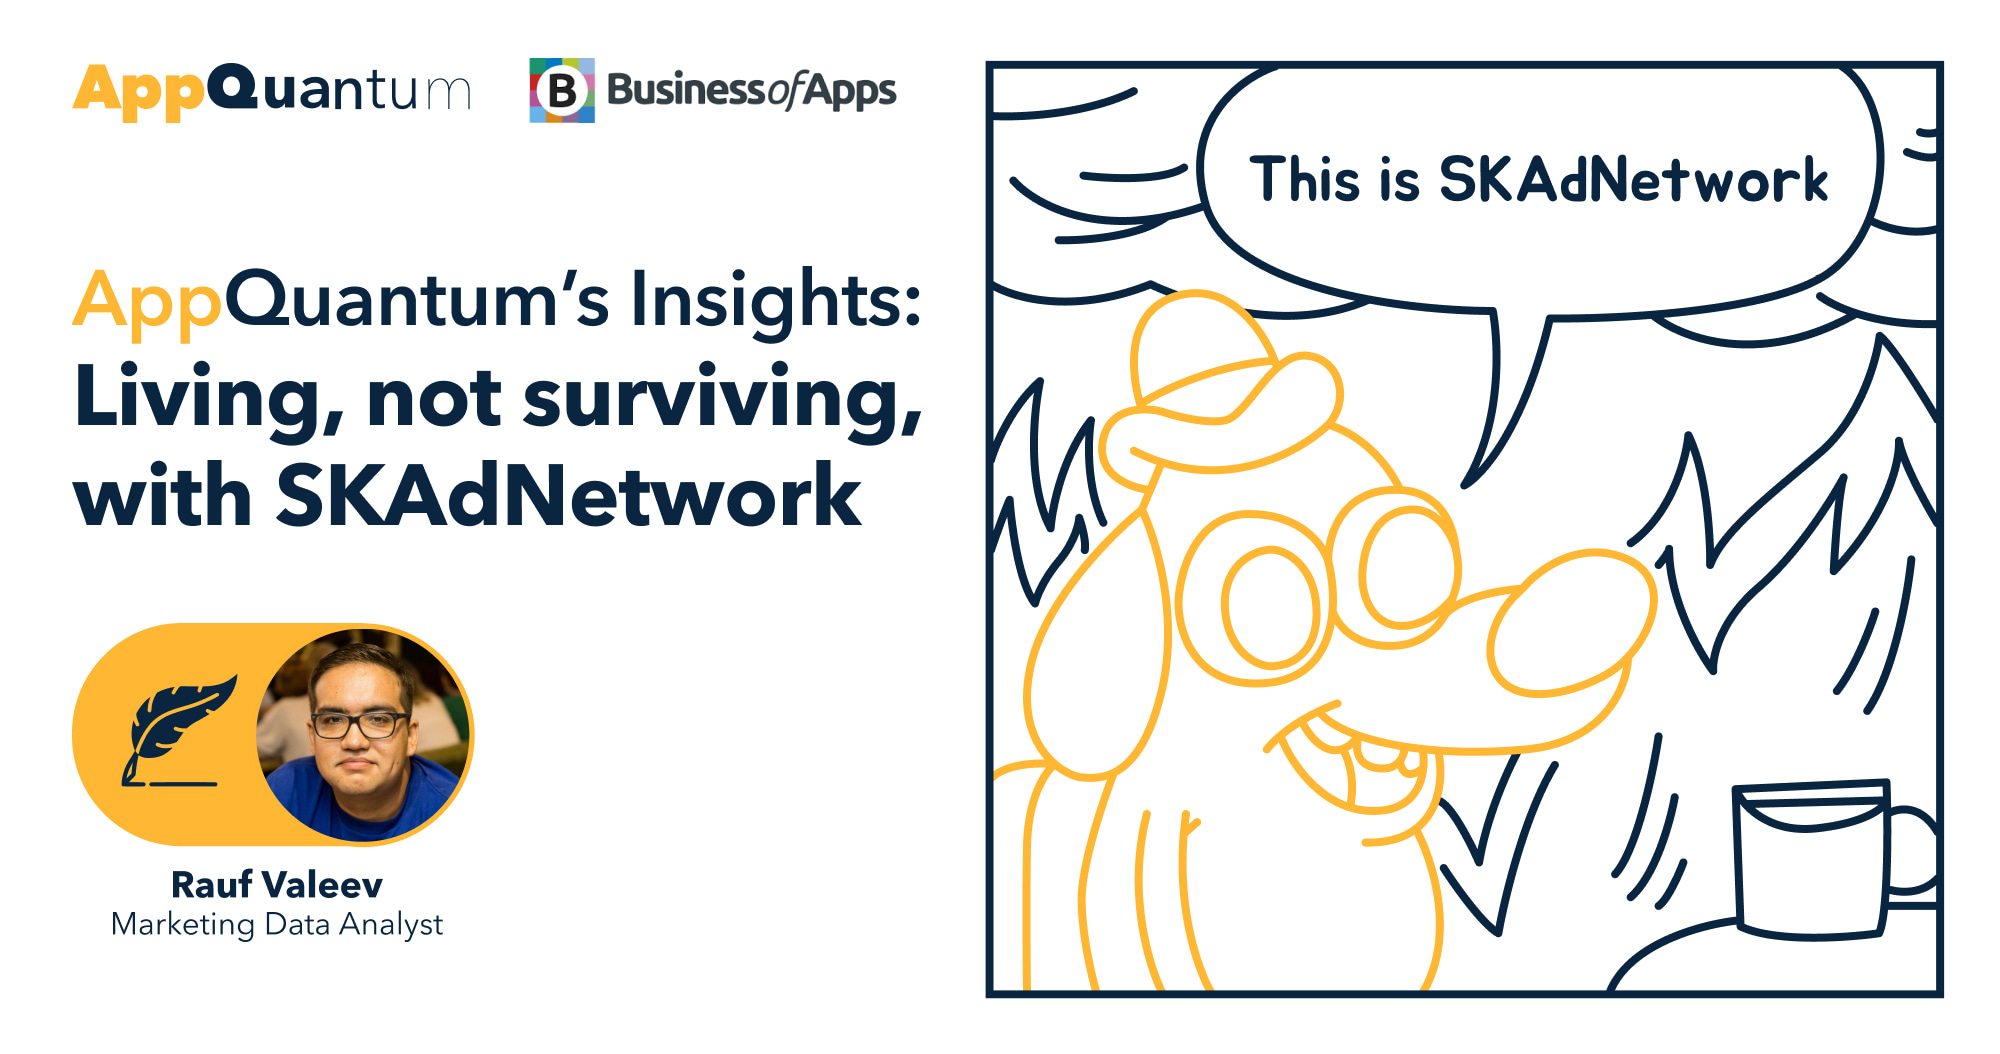 AppQuantum on Business of Apps: Living, not Surviving, with SKAdNetwork